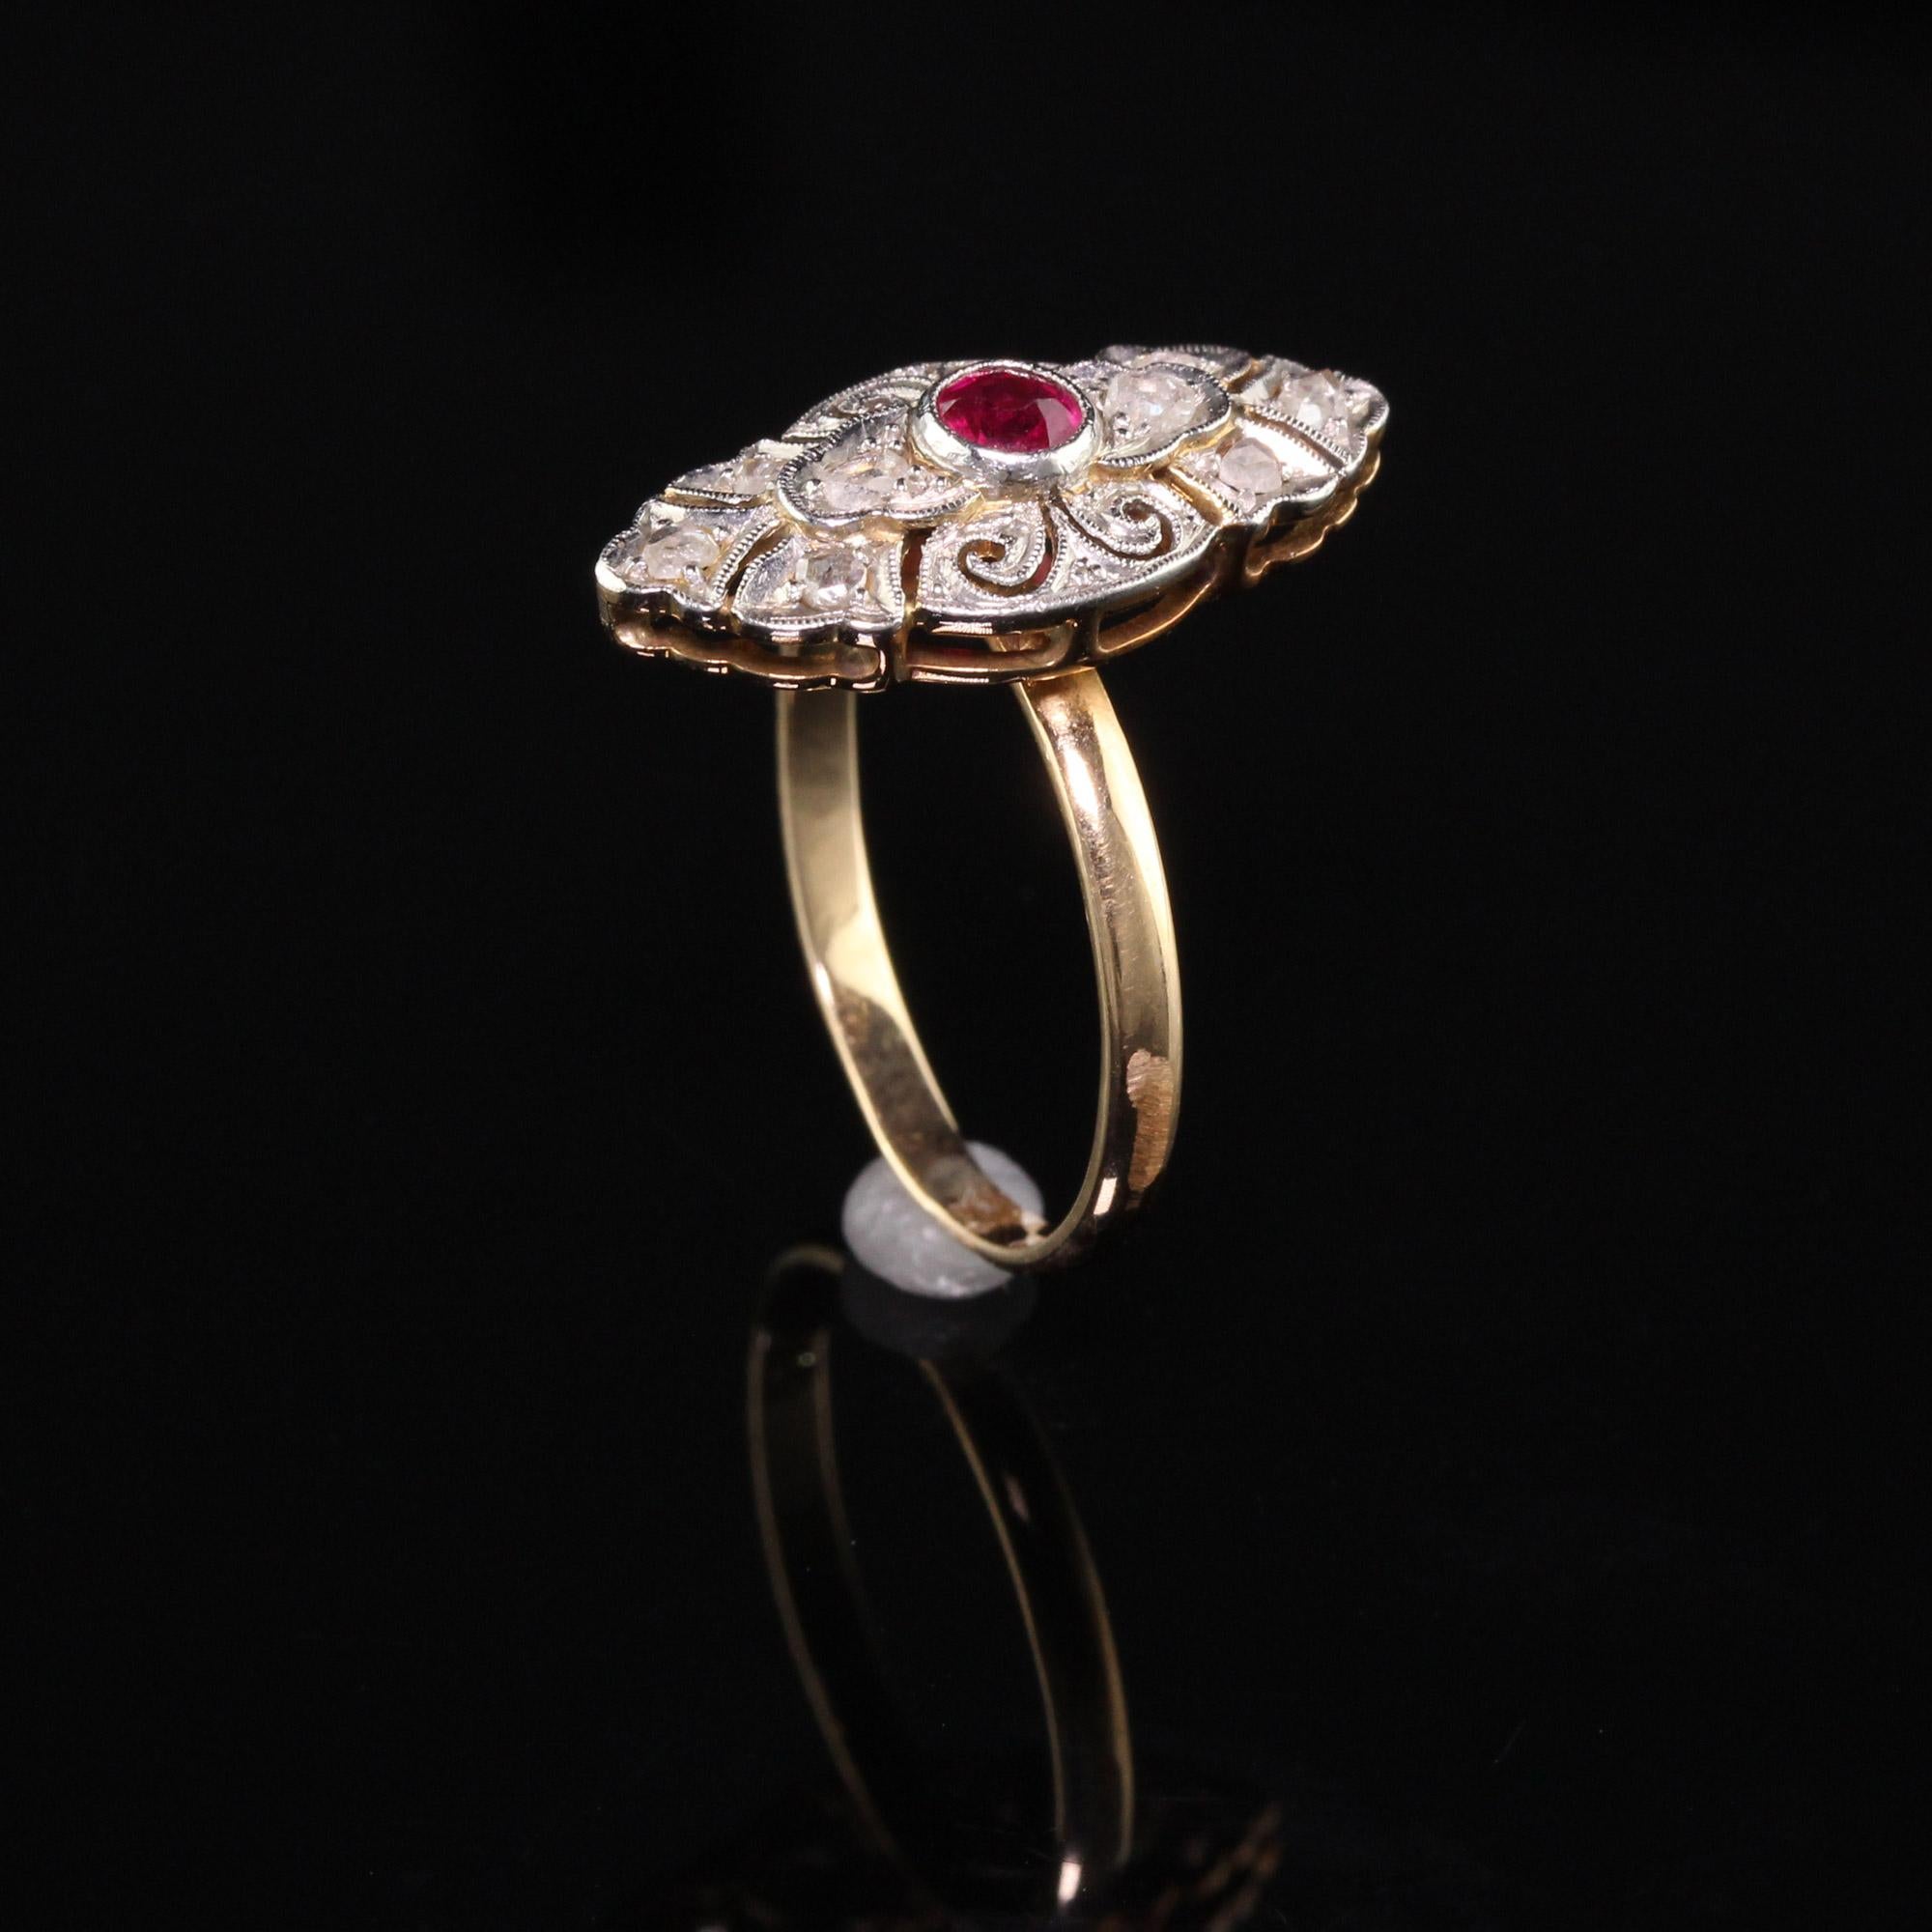 Antique Victorian 18k Yellow Gold Platinum Top Rose Cut Diamond and Ruby Ring For Sale 1